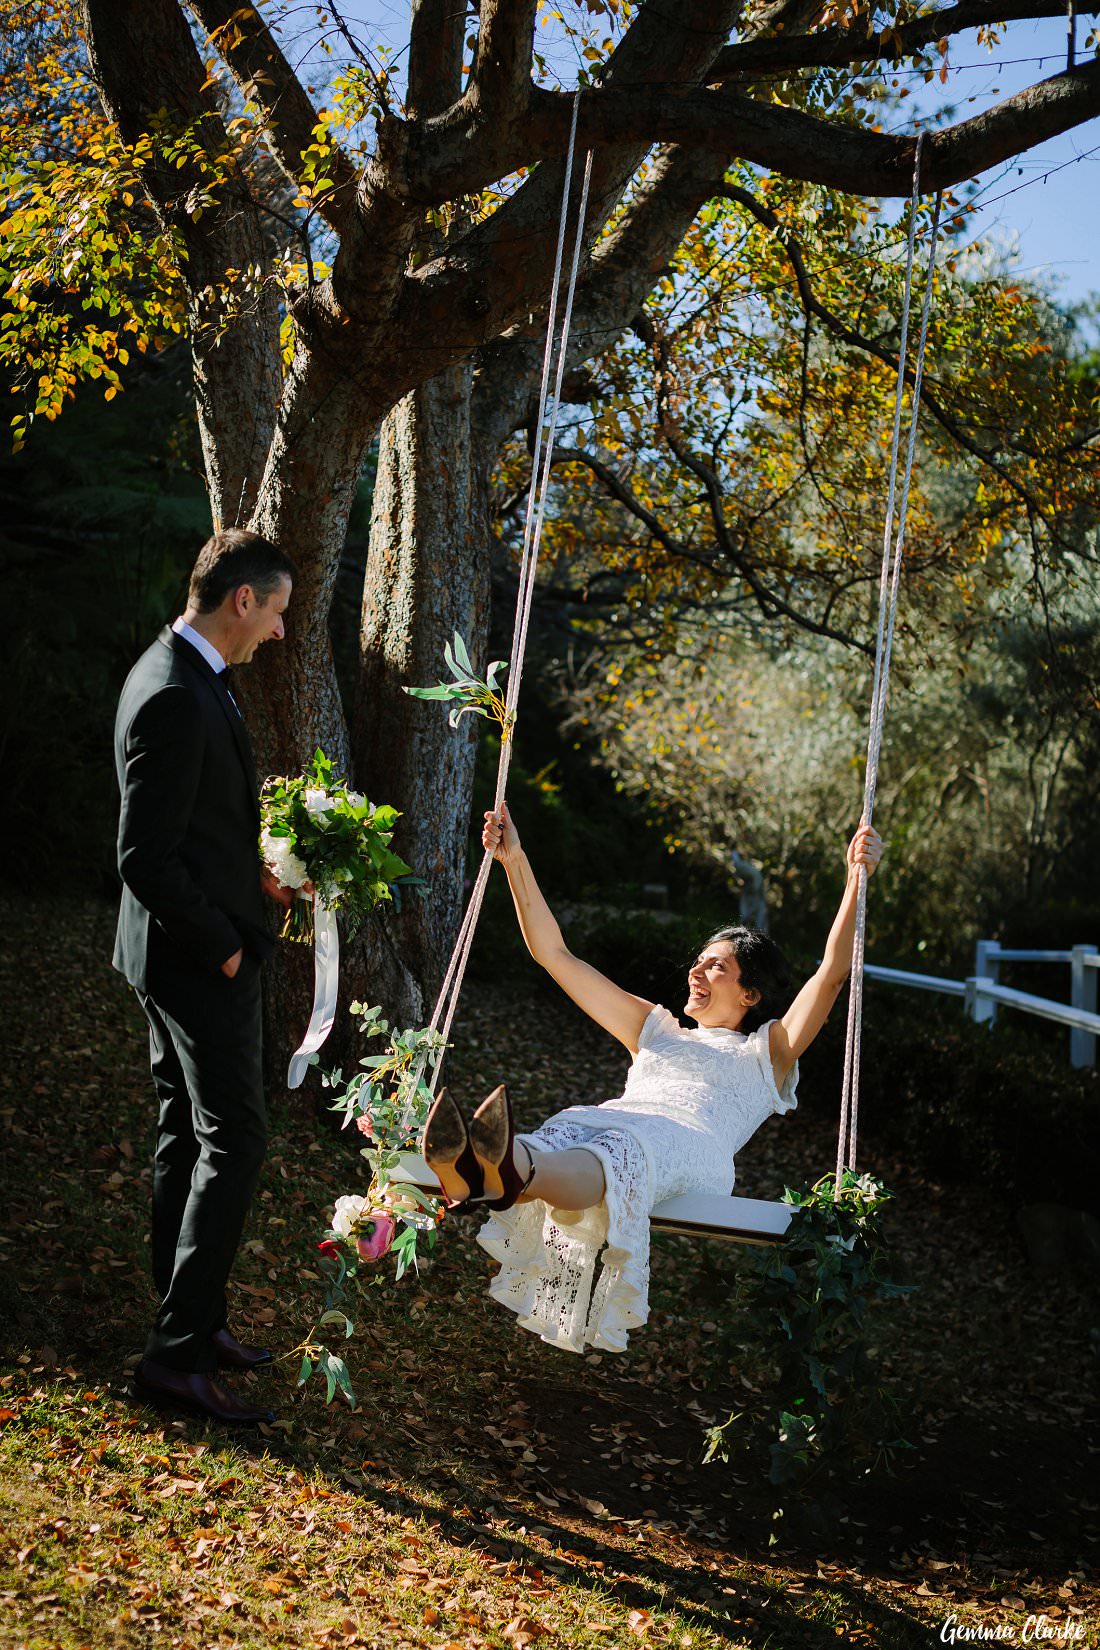 Anna Maria has lots of fun on the swing at her Loxley on Bellbird Hill Wedding with her groom looking on